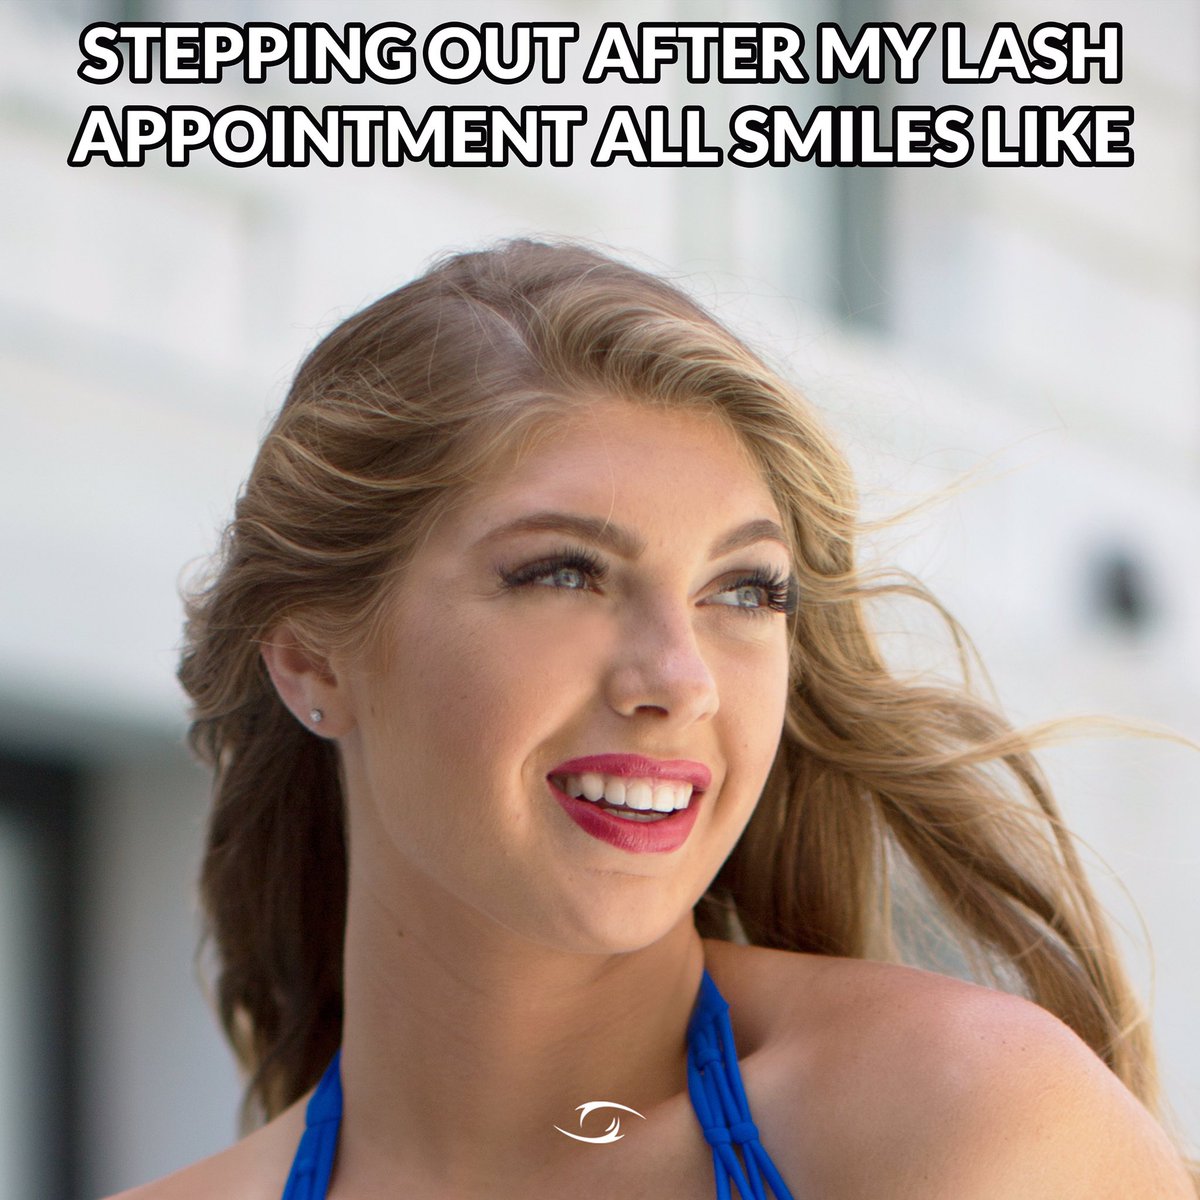 That feeling after your lash appointment. RT and mention your client! 
.
#lashmeme #lavishlashes #lashextensions